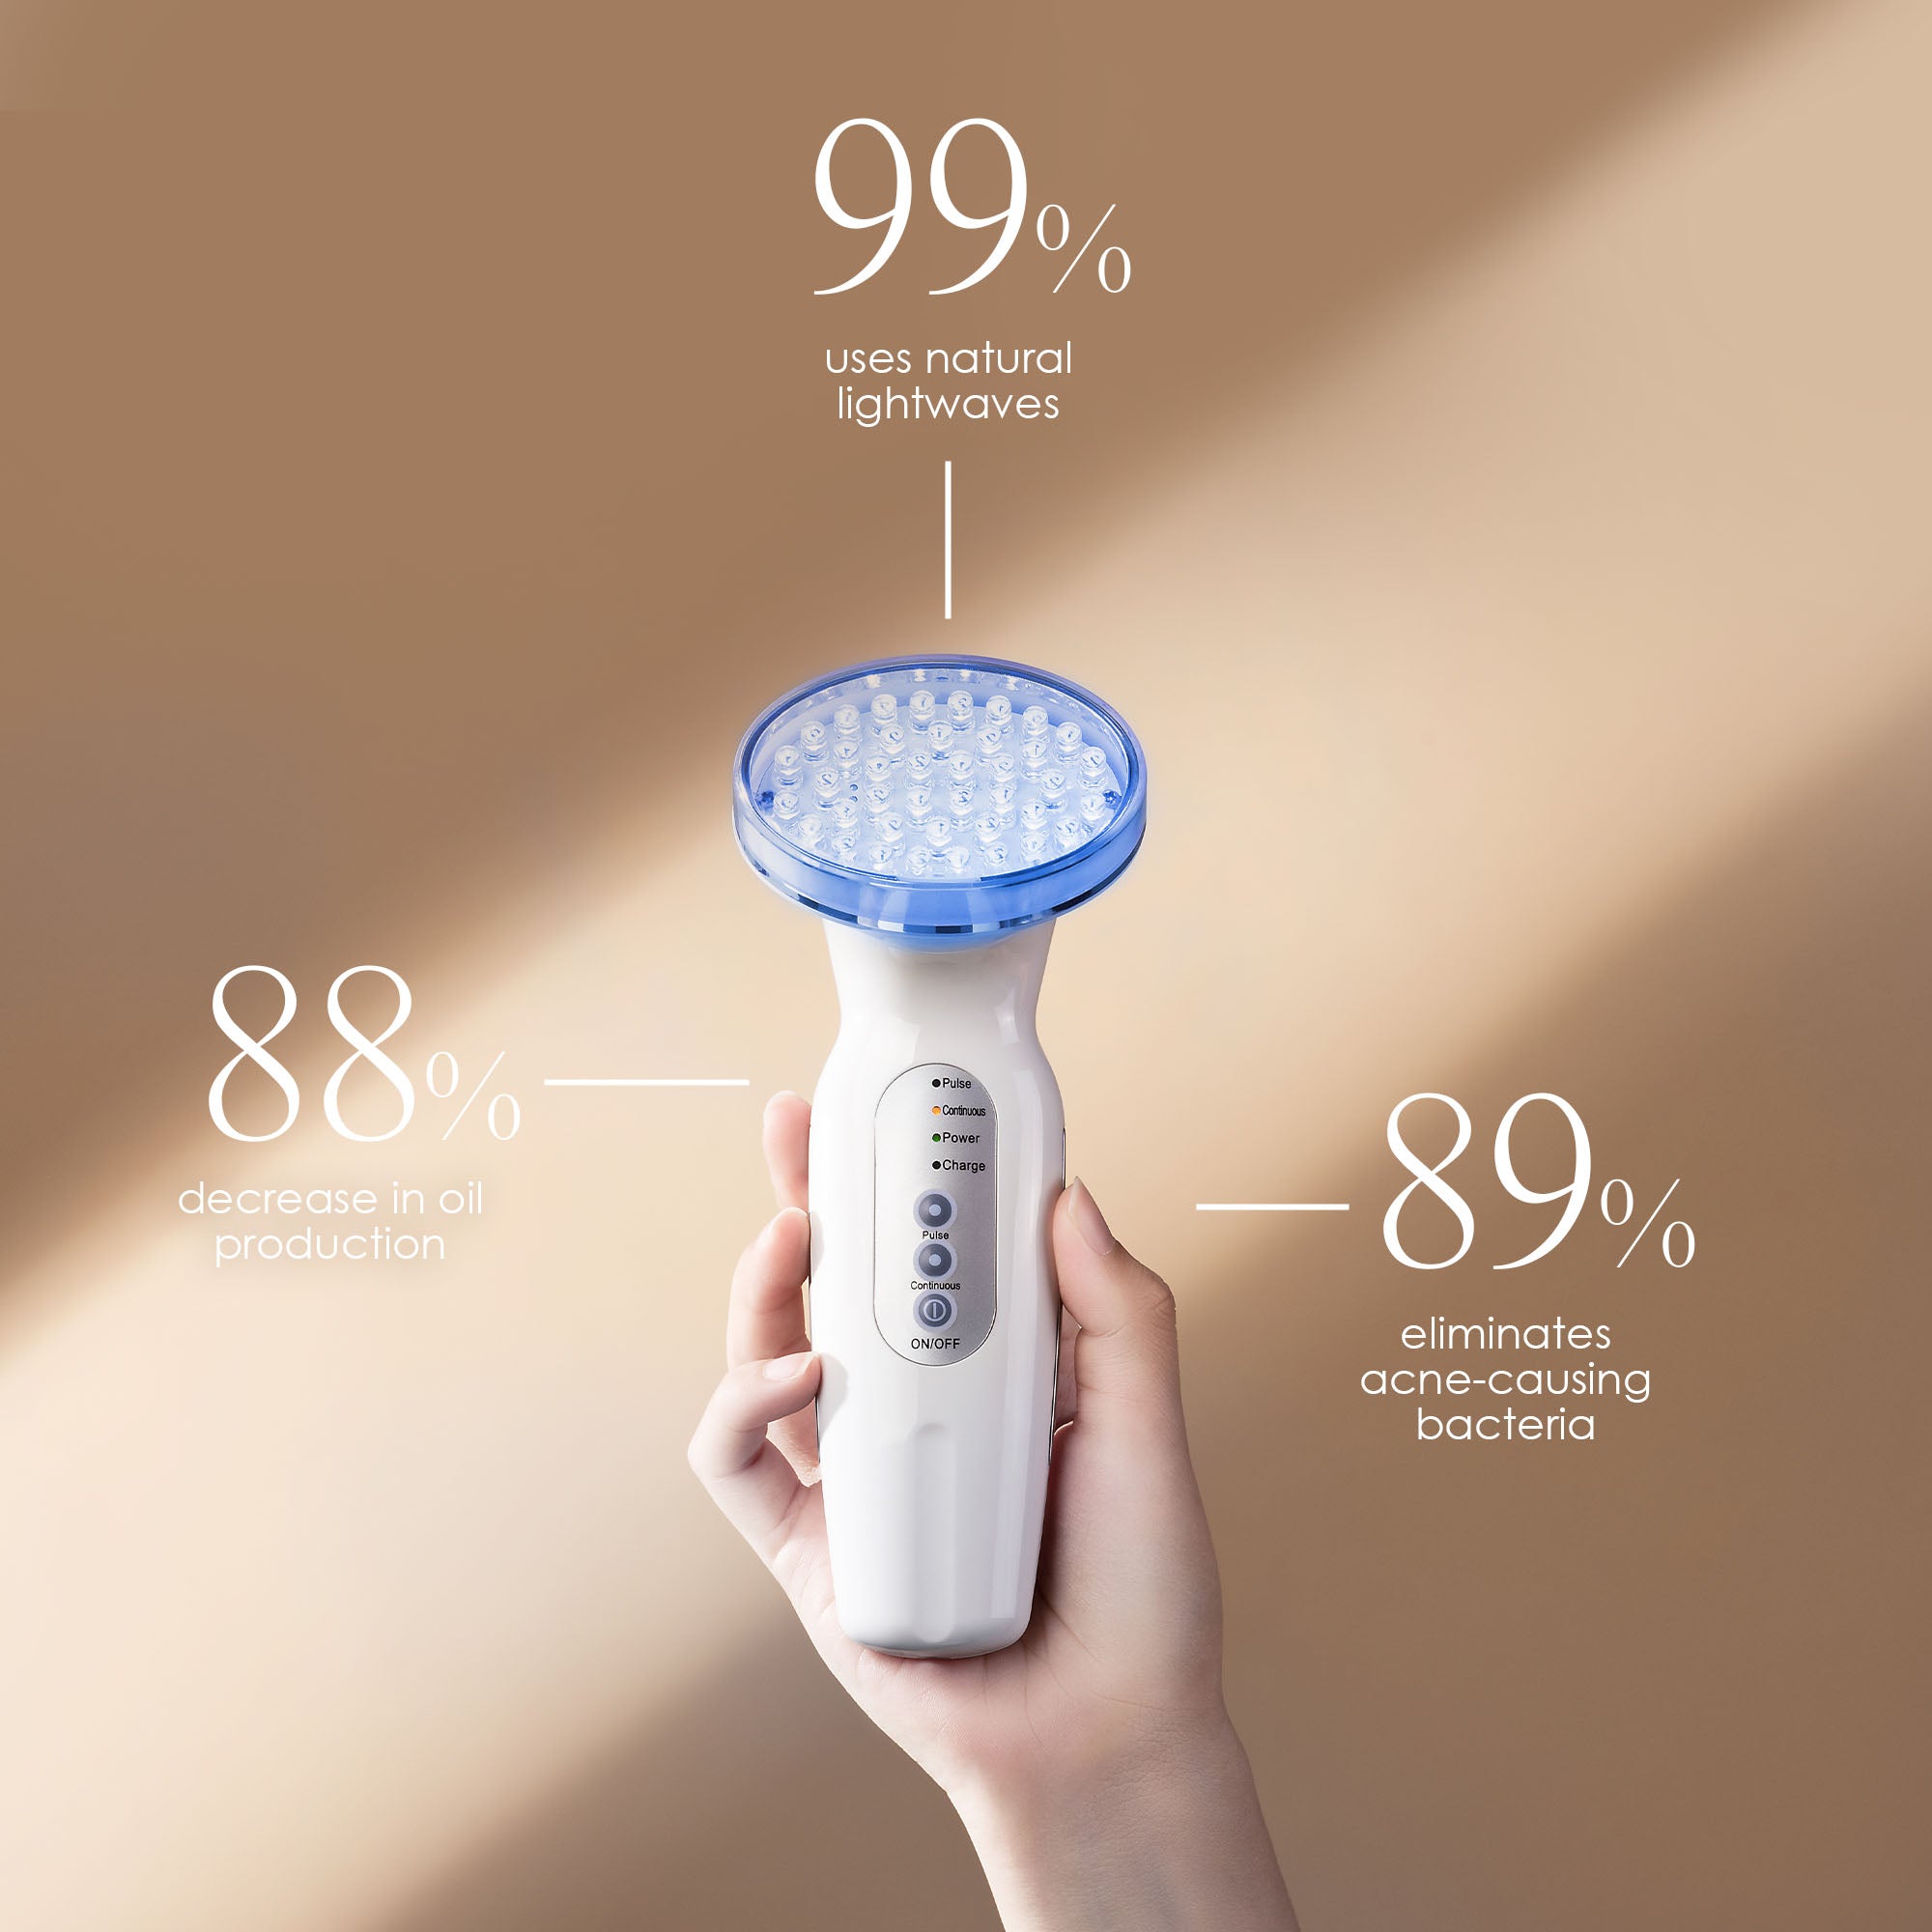 Project E Beauty LumaBlue | LED Light Therapy Cleansing Brush